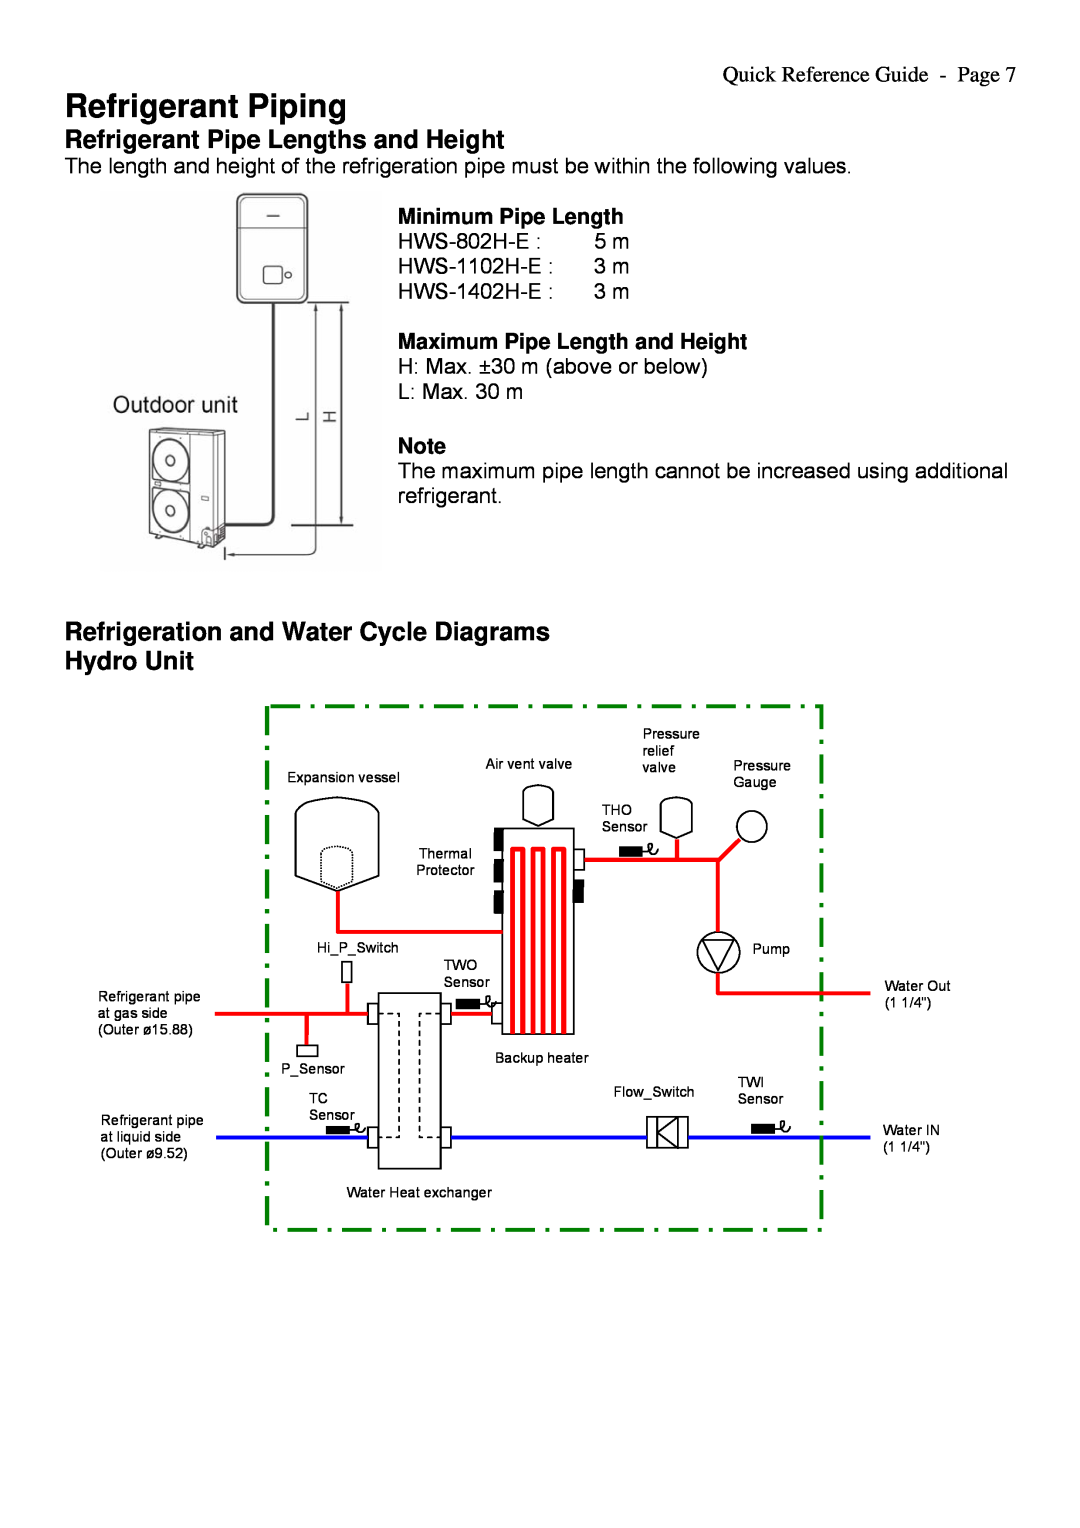 Toshiba A09-01P Refrigerant Piping, Refrigerant Pipe Lengths and Height, Refrigeration and Water Cycle Diagrams Hydro Unit 